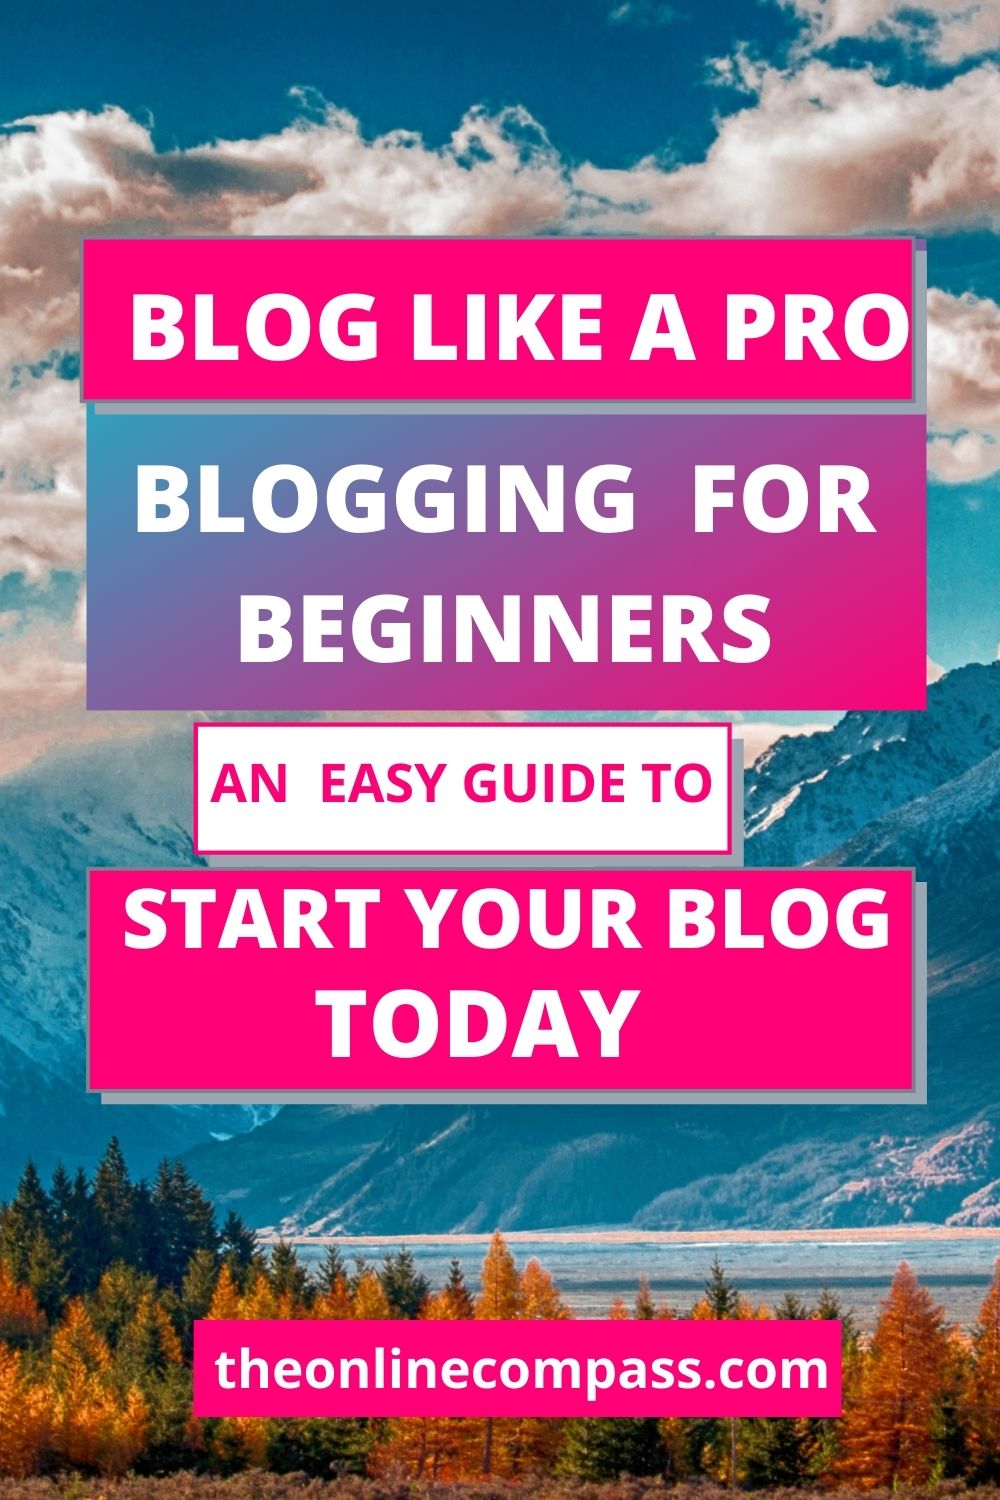 Blogging for beginners' guide to start your blog today